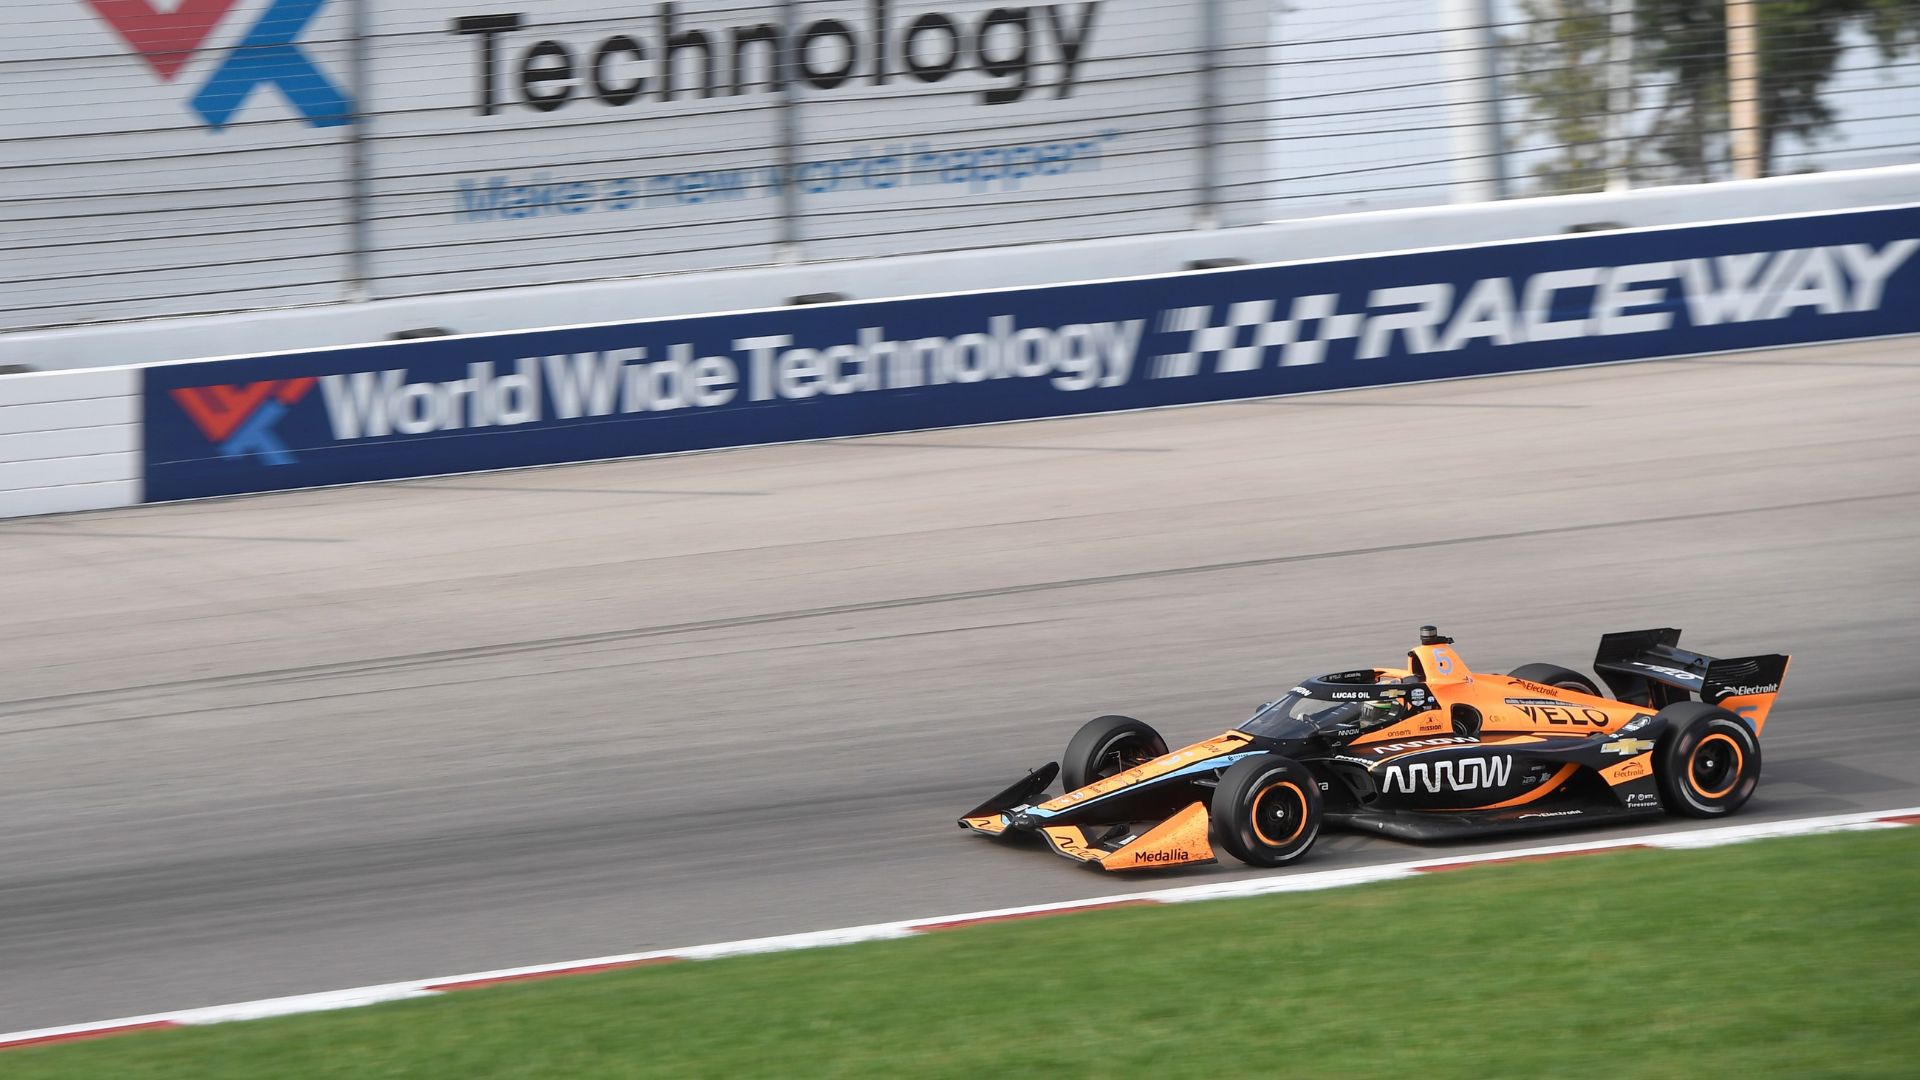 IndyCar comes to World Wide Technology Raceway.